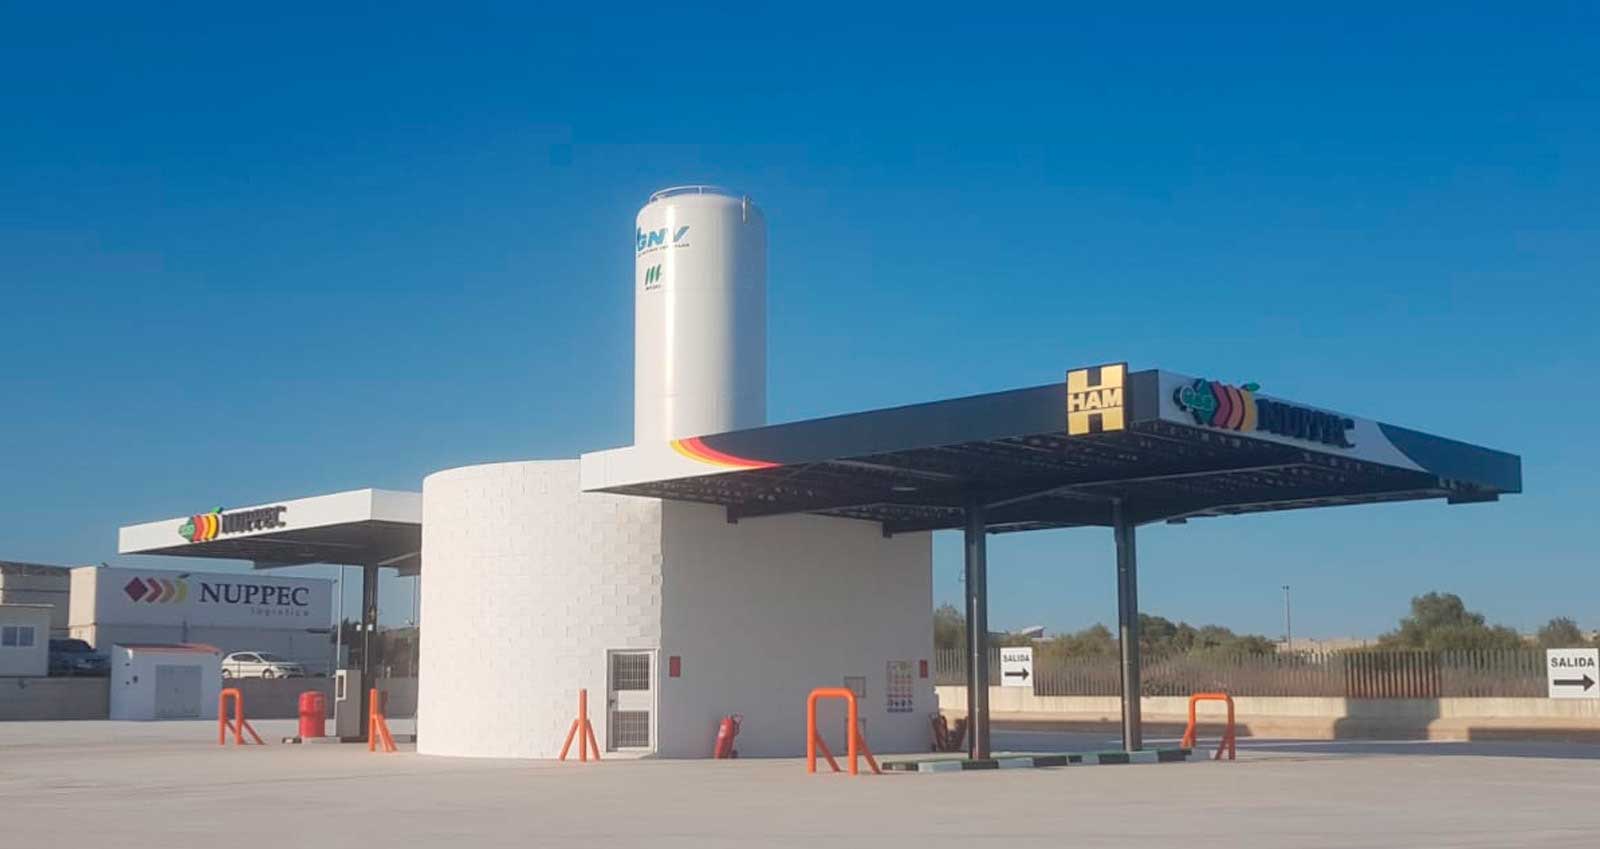 Grupo HAM opens the first liquefied natural gas service station in Villarreal, Castellón. This service station will allow refueling LNG to trucks